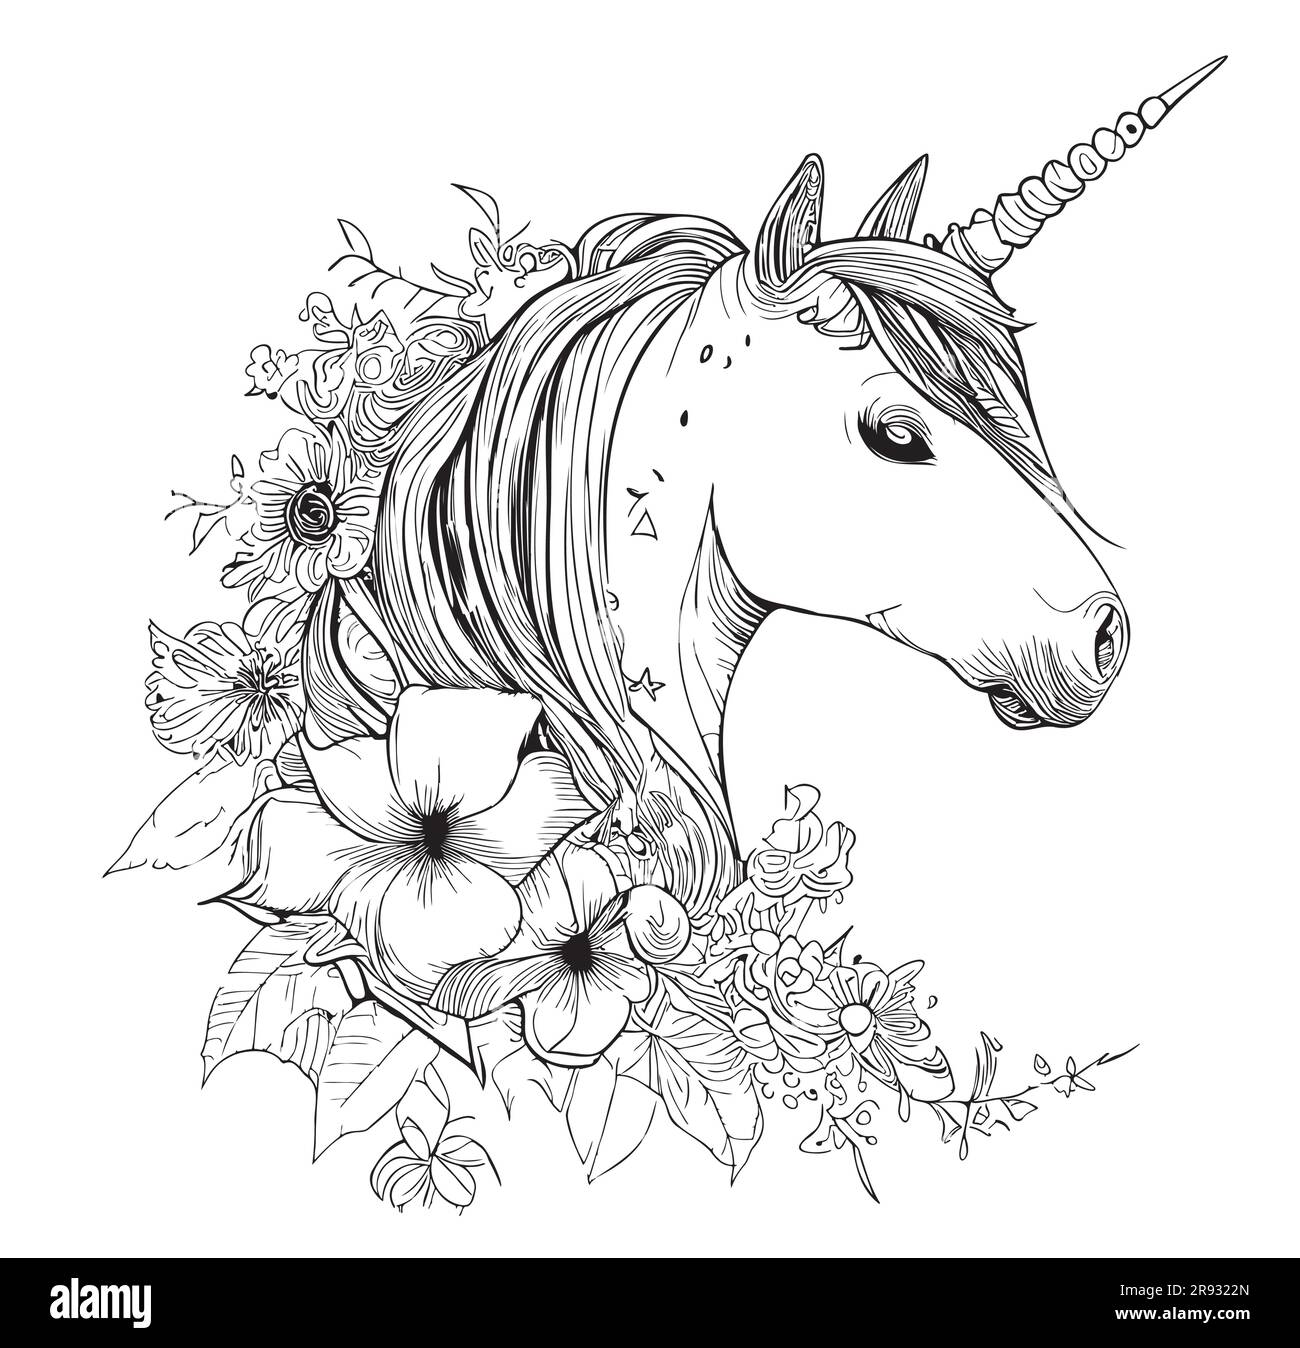 Unicorn fabulous animal sketch hand drawn in doodle style illustration Stock Vector